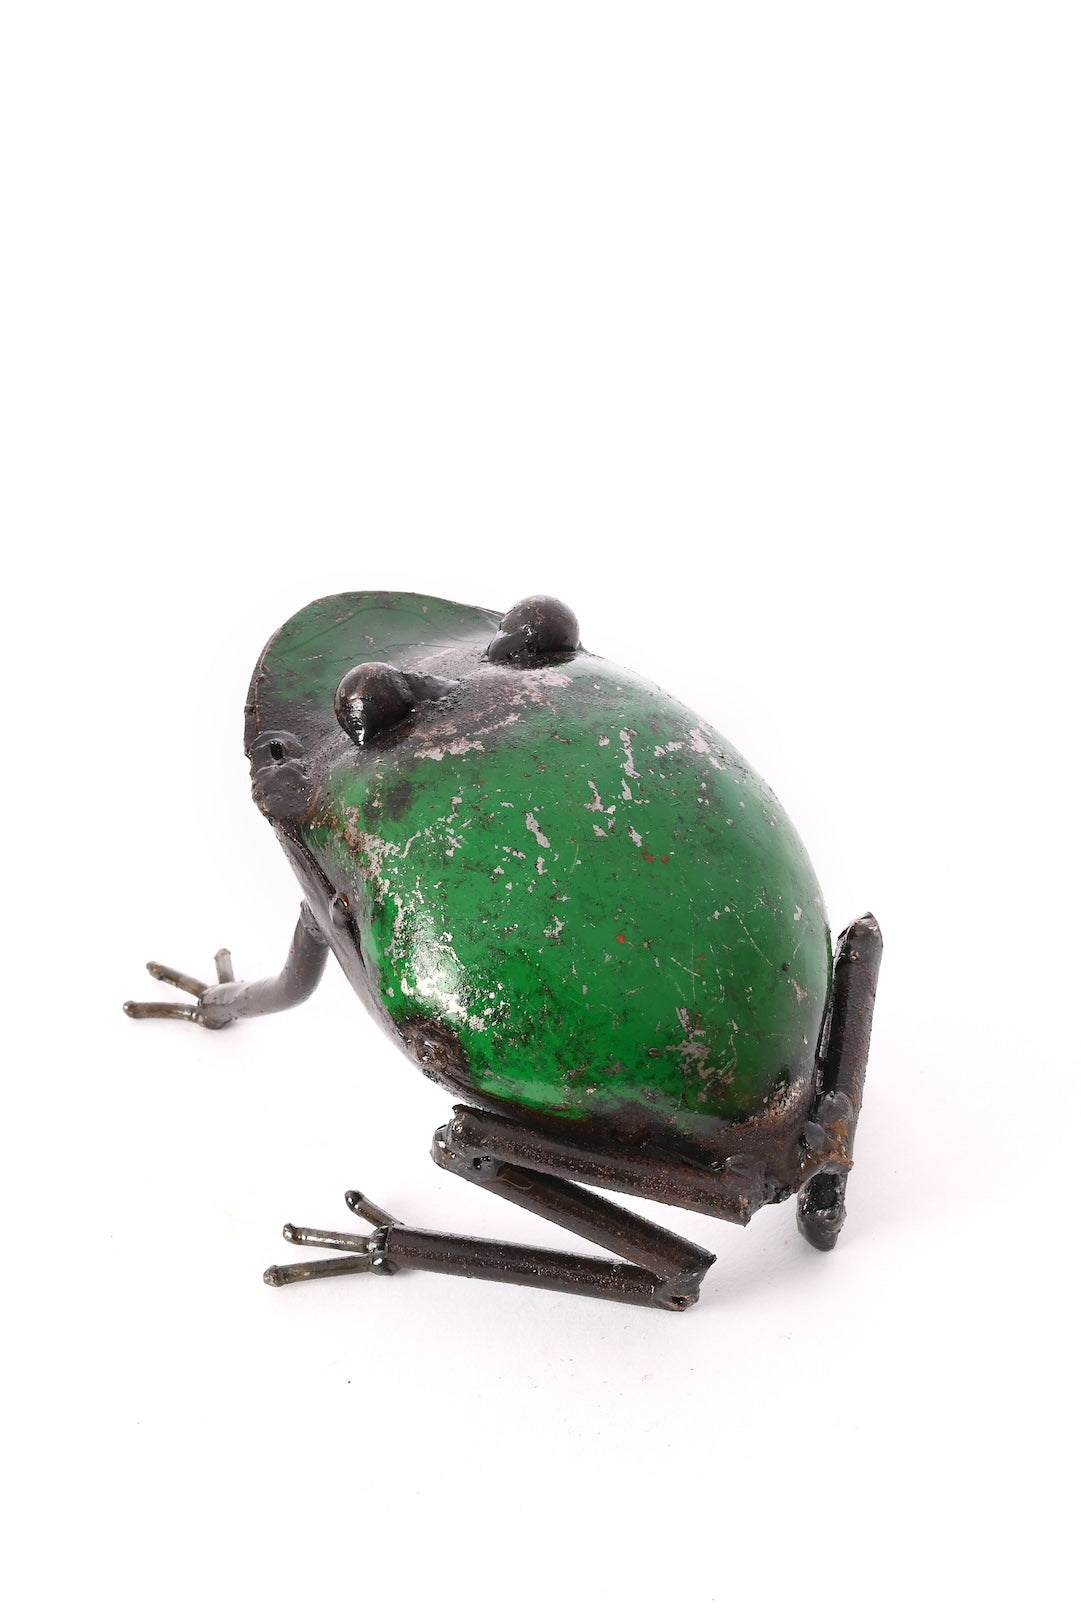 Recycled Oil Drum Frog - Green